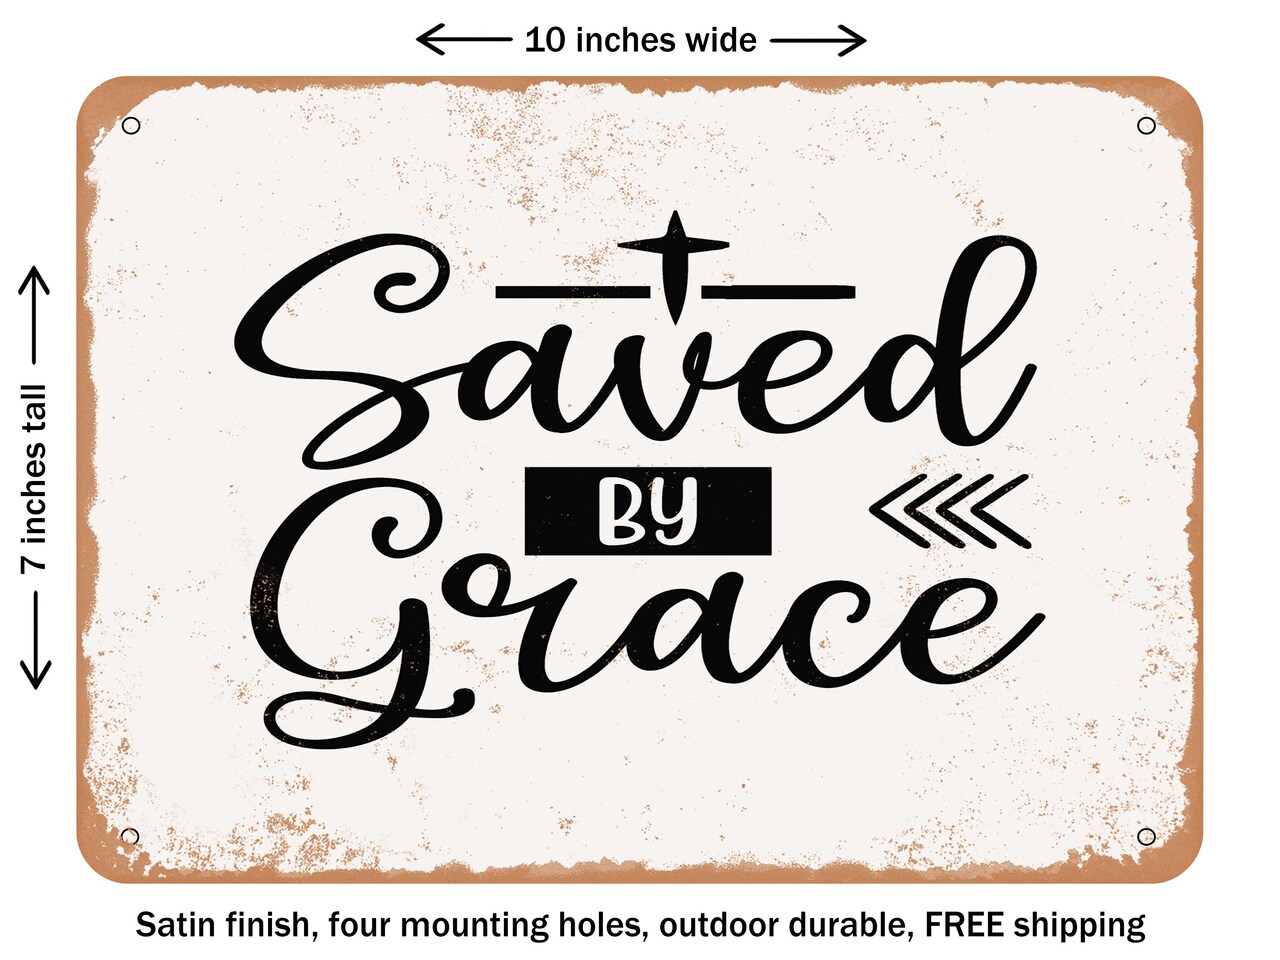 DECORATIVE METAL SIGN - Saved by Grace - 5 - Vintage Rusty Look